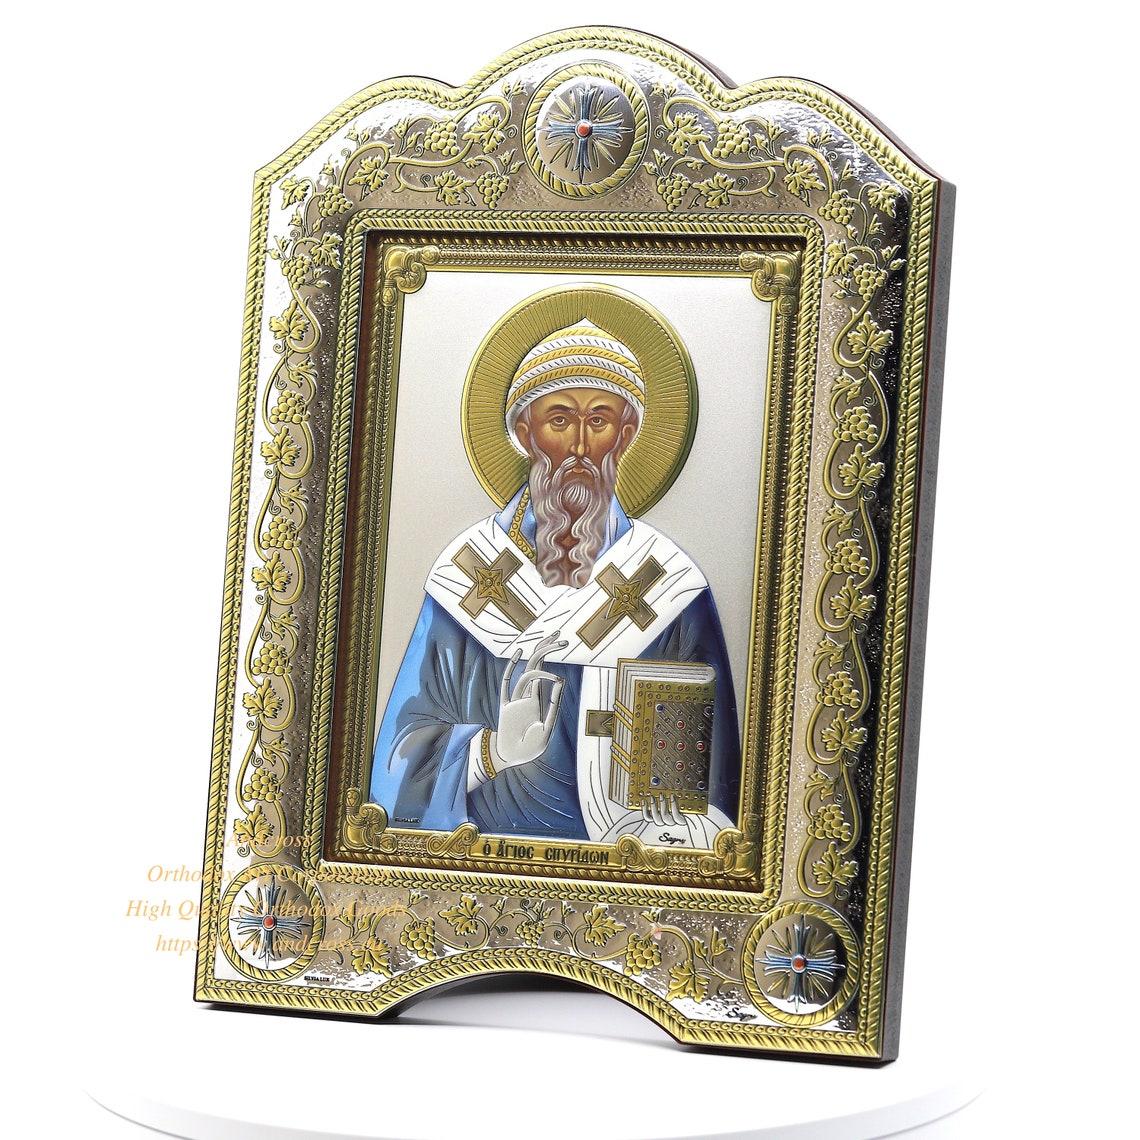 The Great Miraculous Christian Orthodox Silver Icon The Saint Spyridon Bishop of Trimythous 21×28/Gold and silver version/Frame with glass. B105|The Great Miraculous Christian Orthodox Silver Icon The Saint Spyridon Bishop of Trimythous 21×28/Gold and silver version/Frame with glass. B105|The Great Miraculous Christian Orthodox Silver Icon The Saint Spyridon Bishop of Trimythous 21×28/Gold and silver version/Frame with glass. B105|The Great Miraculous Christian Orthodox Silver Icon The Saint Spyridon Bishop of Trimythous 21×28/Gold and silver version/Frame with glass. B105|The Great Miraculous Christian Orthodox Silver Icon The Saint Spyridon Bishop of Trimythous 21×28/Gold and silver version/Frame with glass. B105